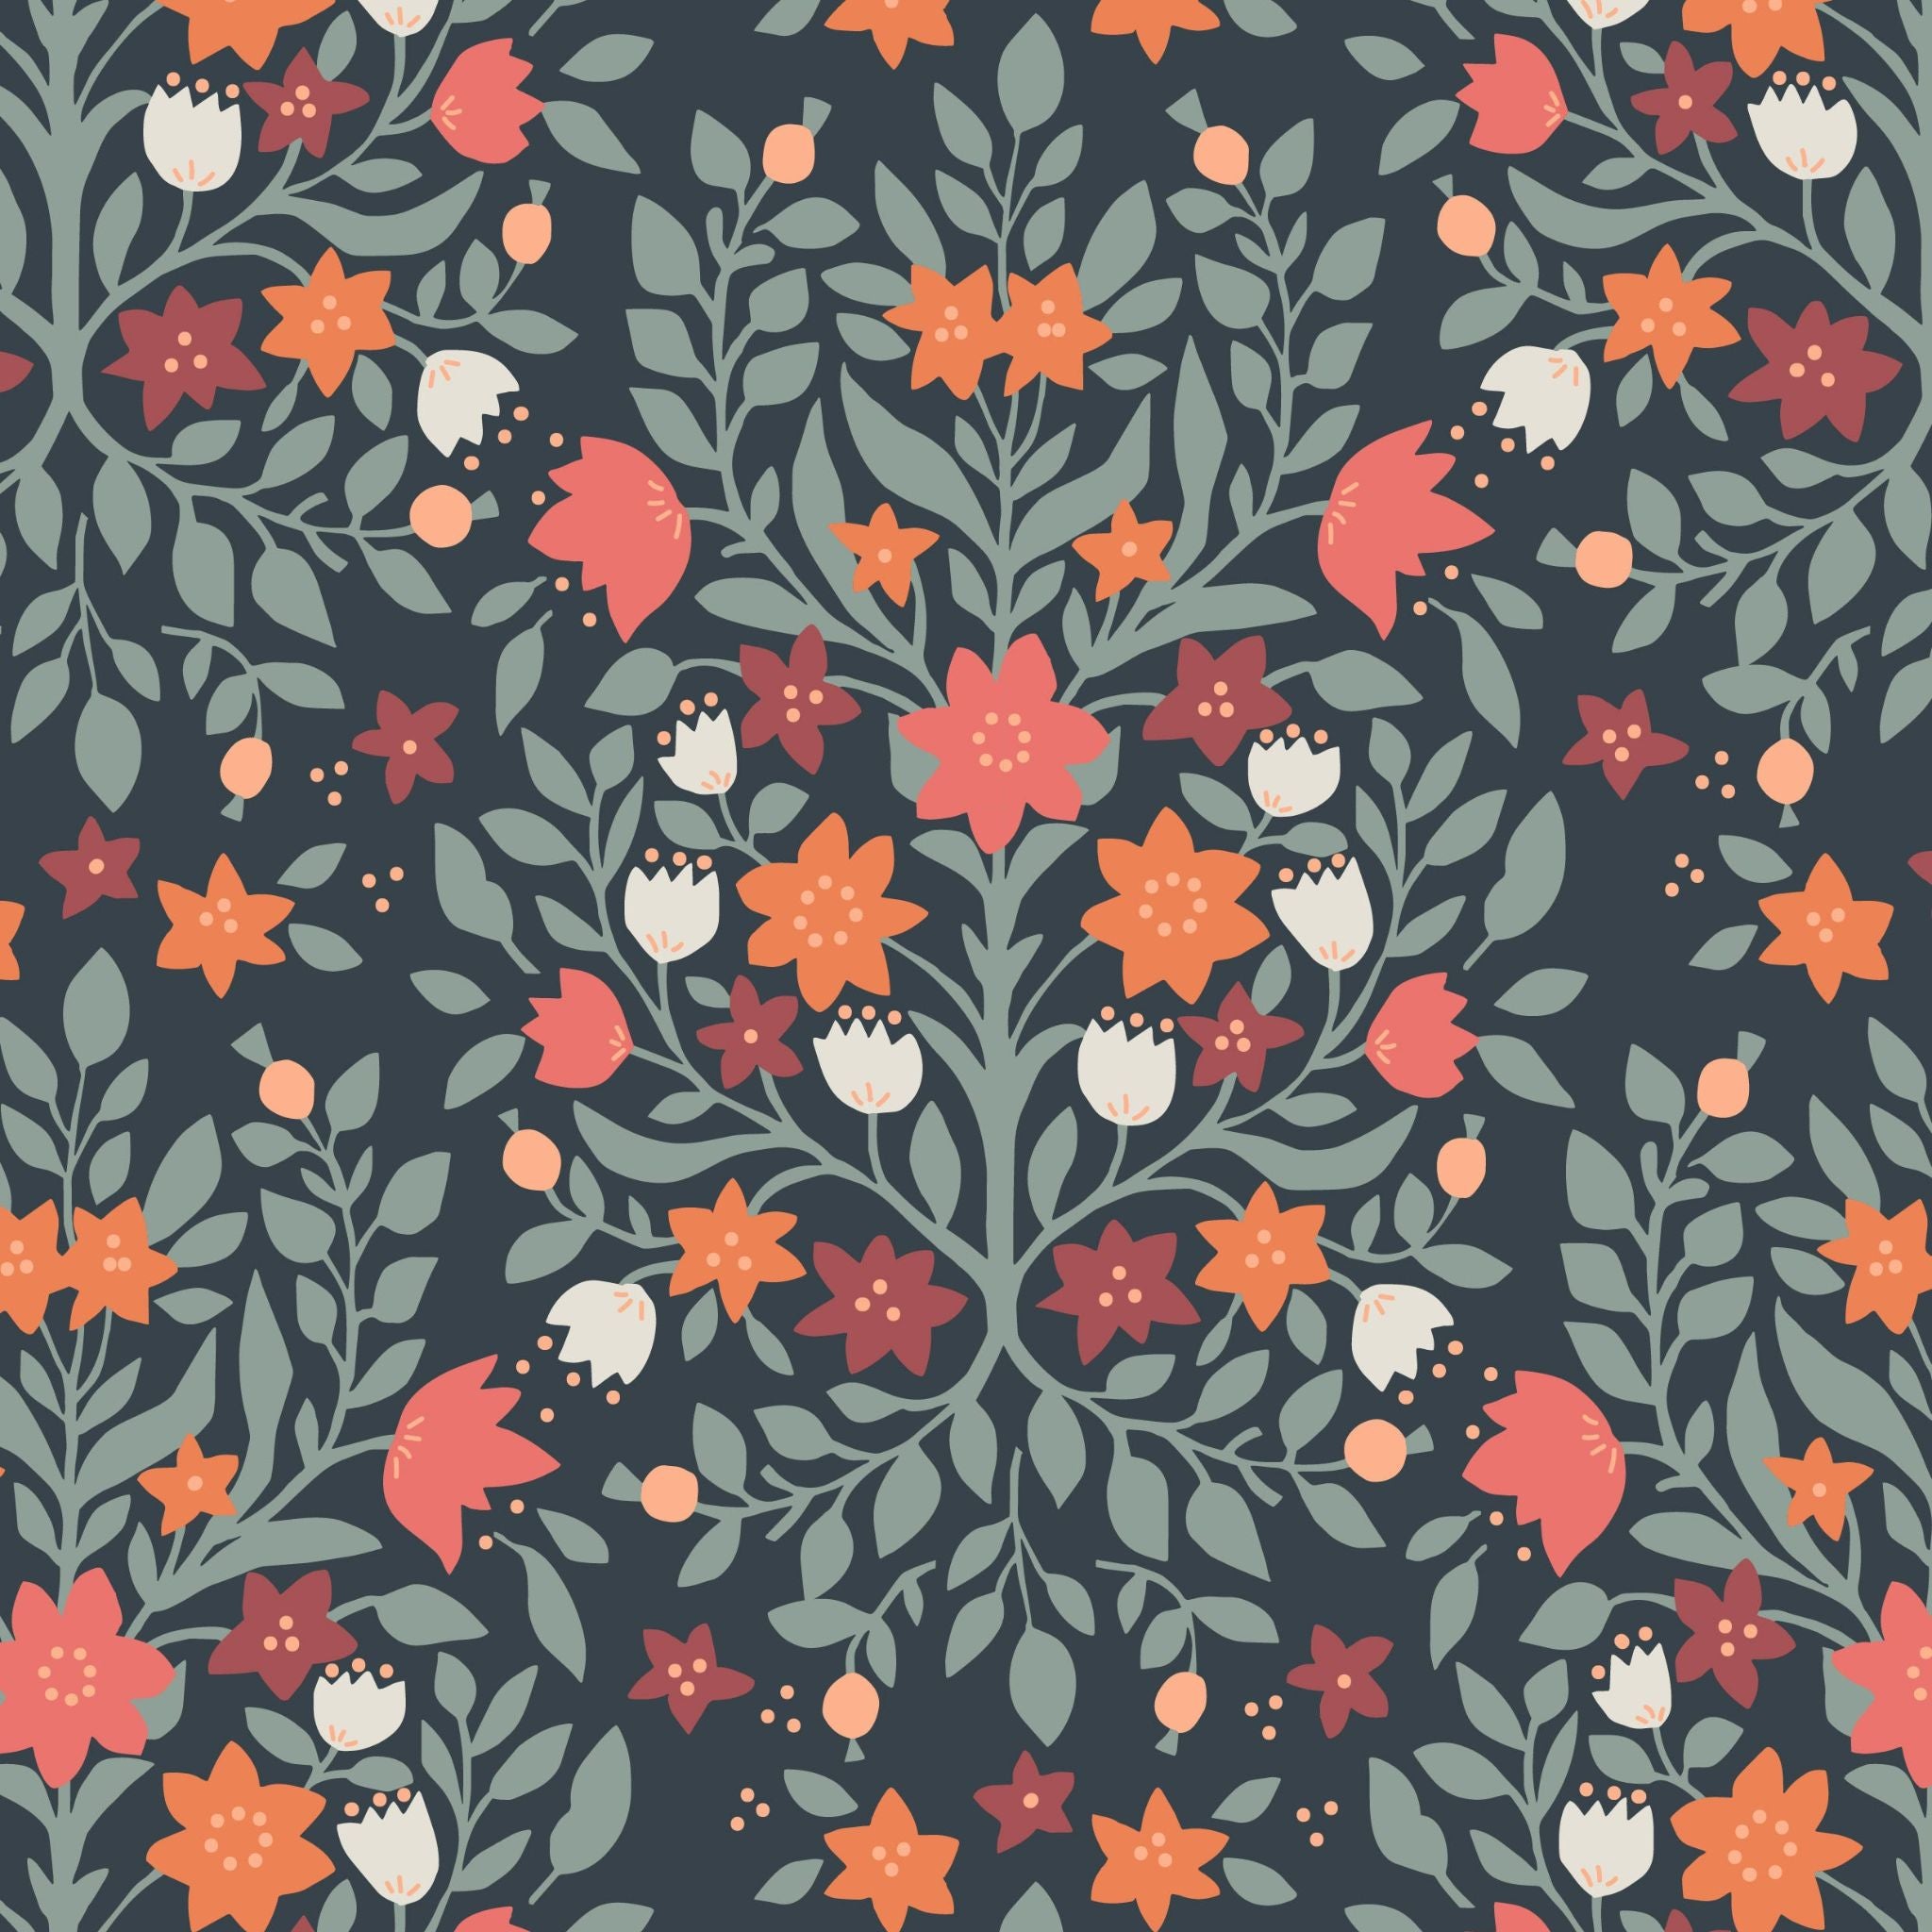 Orange flowers on a damask style cotton fabric - Folk Floral by Lewis and Irenee